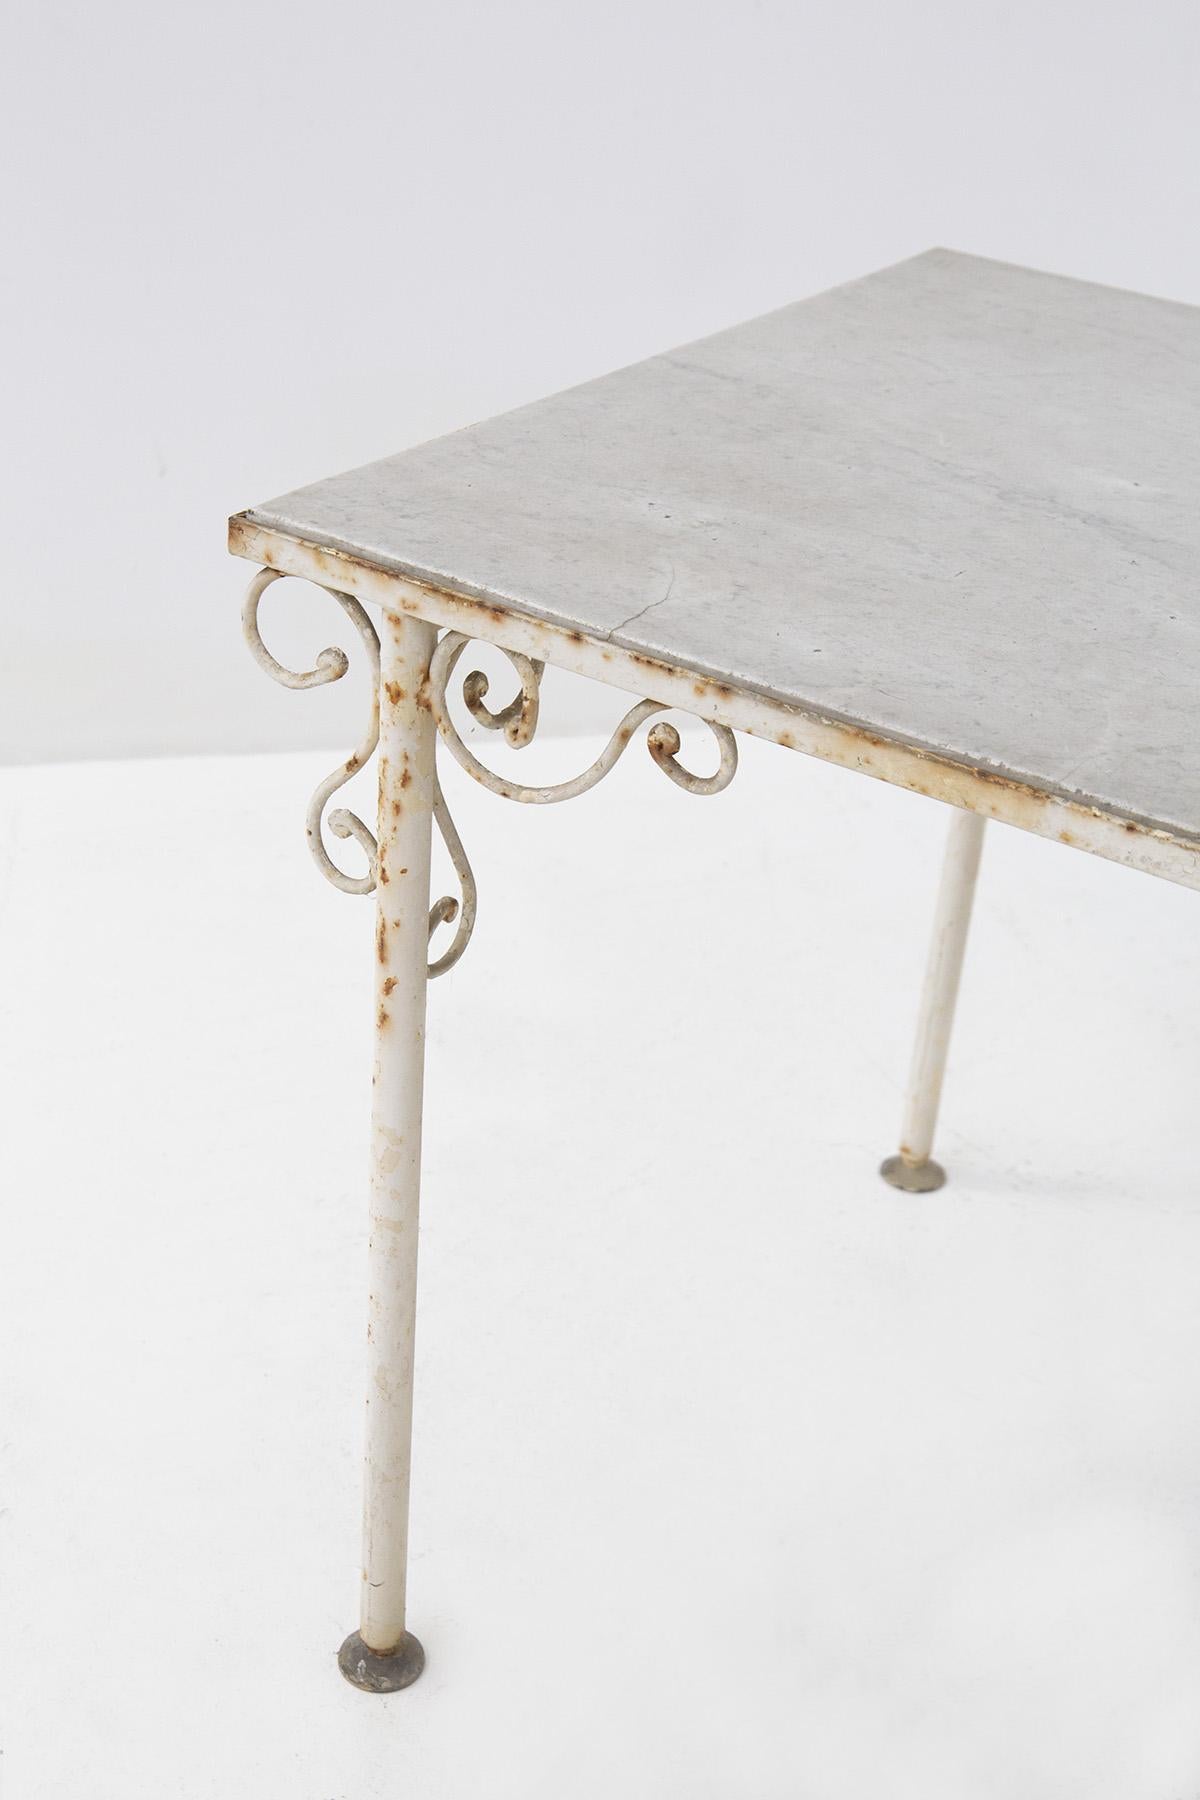 Beautiful French table from the late 1800s, made in France of the Rustic Chic style.
The table has a wrought iron frame painted white, has four cylindrical legs that support the top. The marvel of French workmanship can be seen in the sinuous and